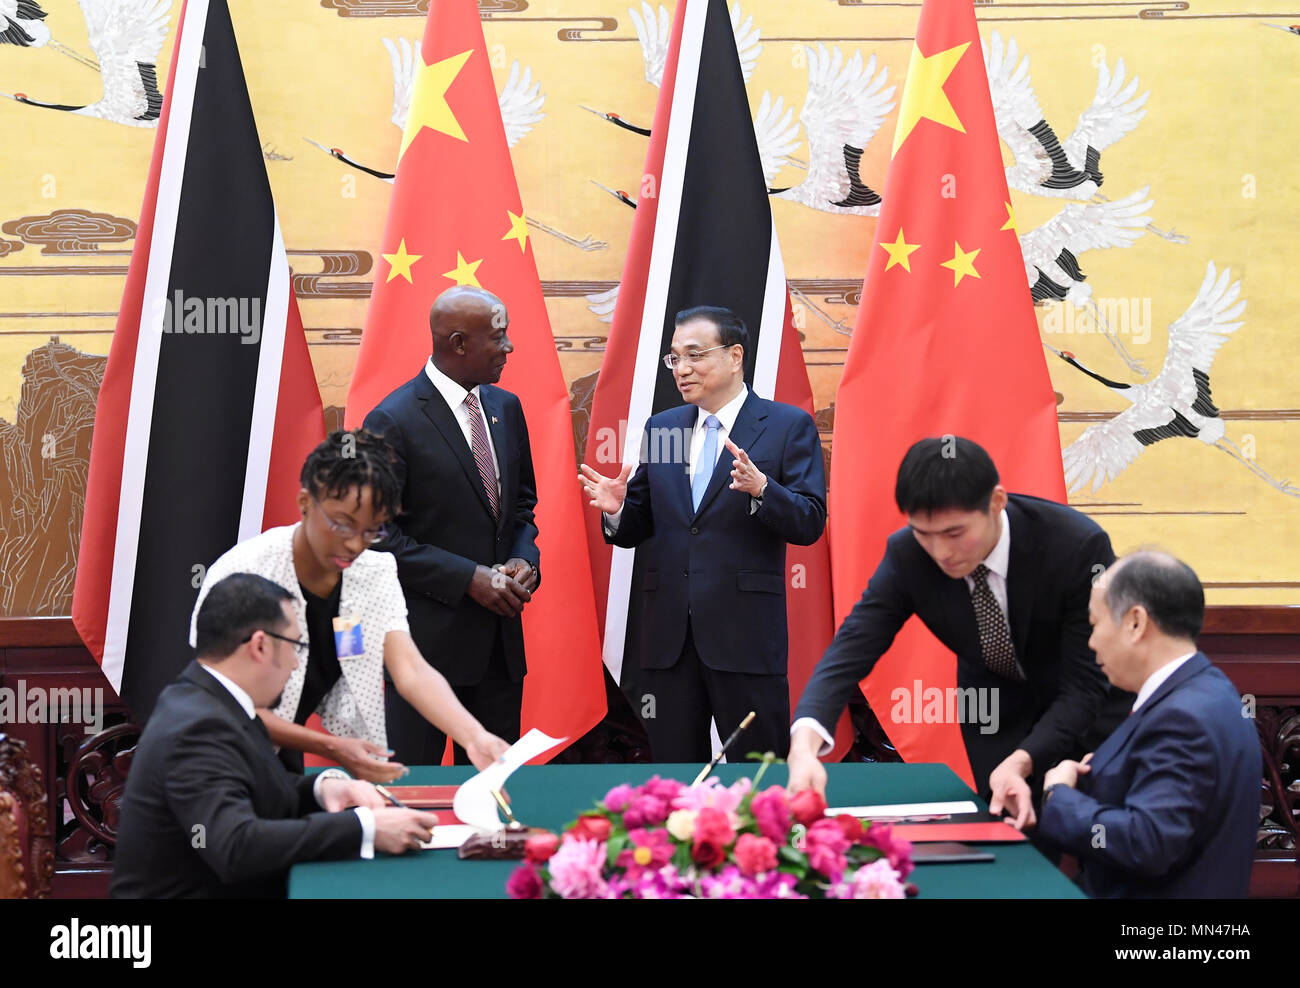 Beijing, China. 14th May, 2018. Chinese Premier Li Keqiang and Prime Minister Keith Rowley of Trinidad and Tobago witness the signing of documents concerning bilateral cooperation in economy and technology, health care and human resources after their talks in Beijing, capital of China, May 14, 2018. Credit: Yan Yan/Xinhua/Alamy Live News Stock Photo